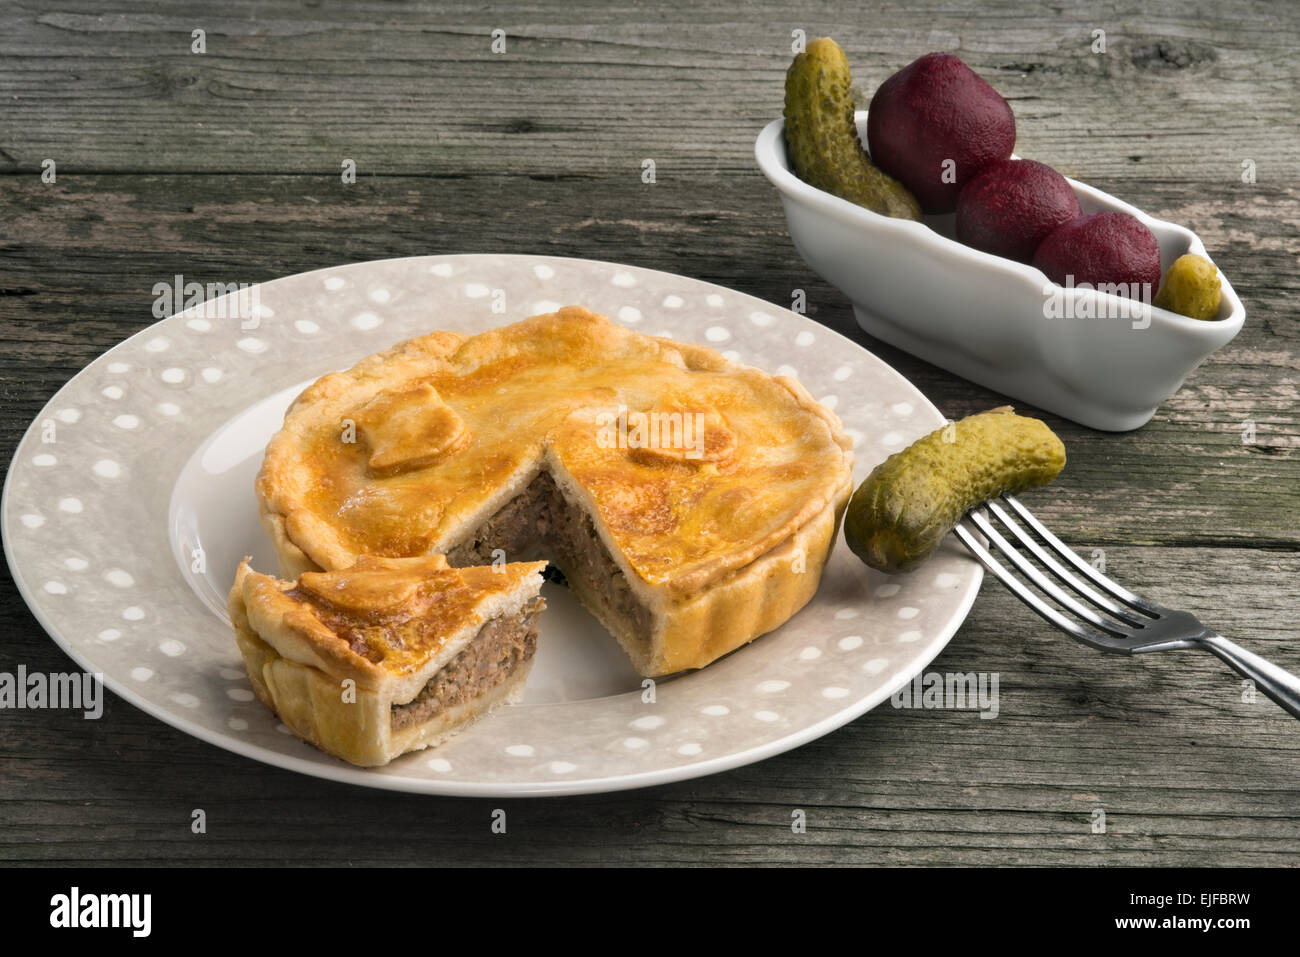 Traditional British pork pie with lard crust, gherkins and pickled red beet. Stock Photo